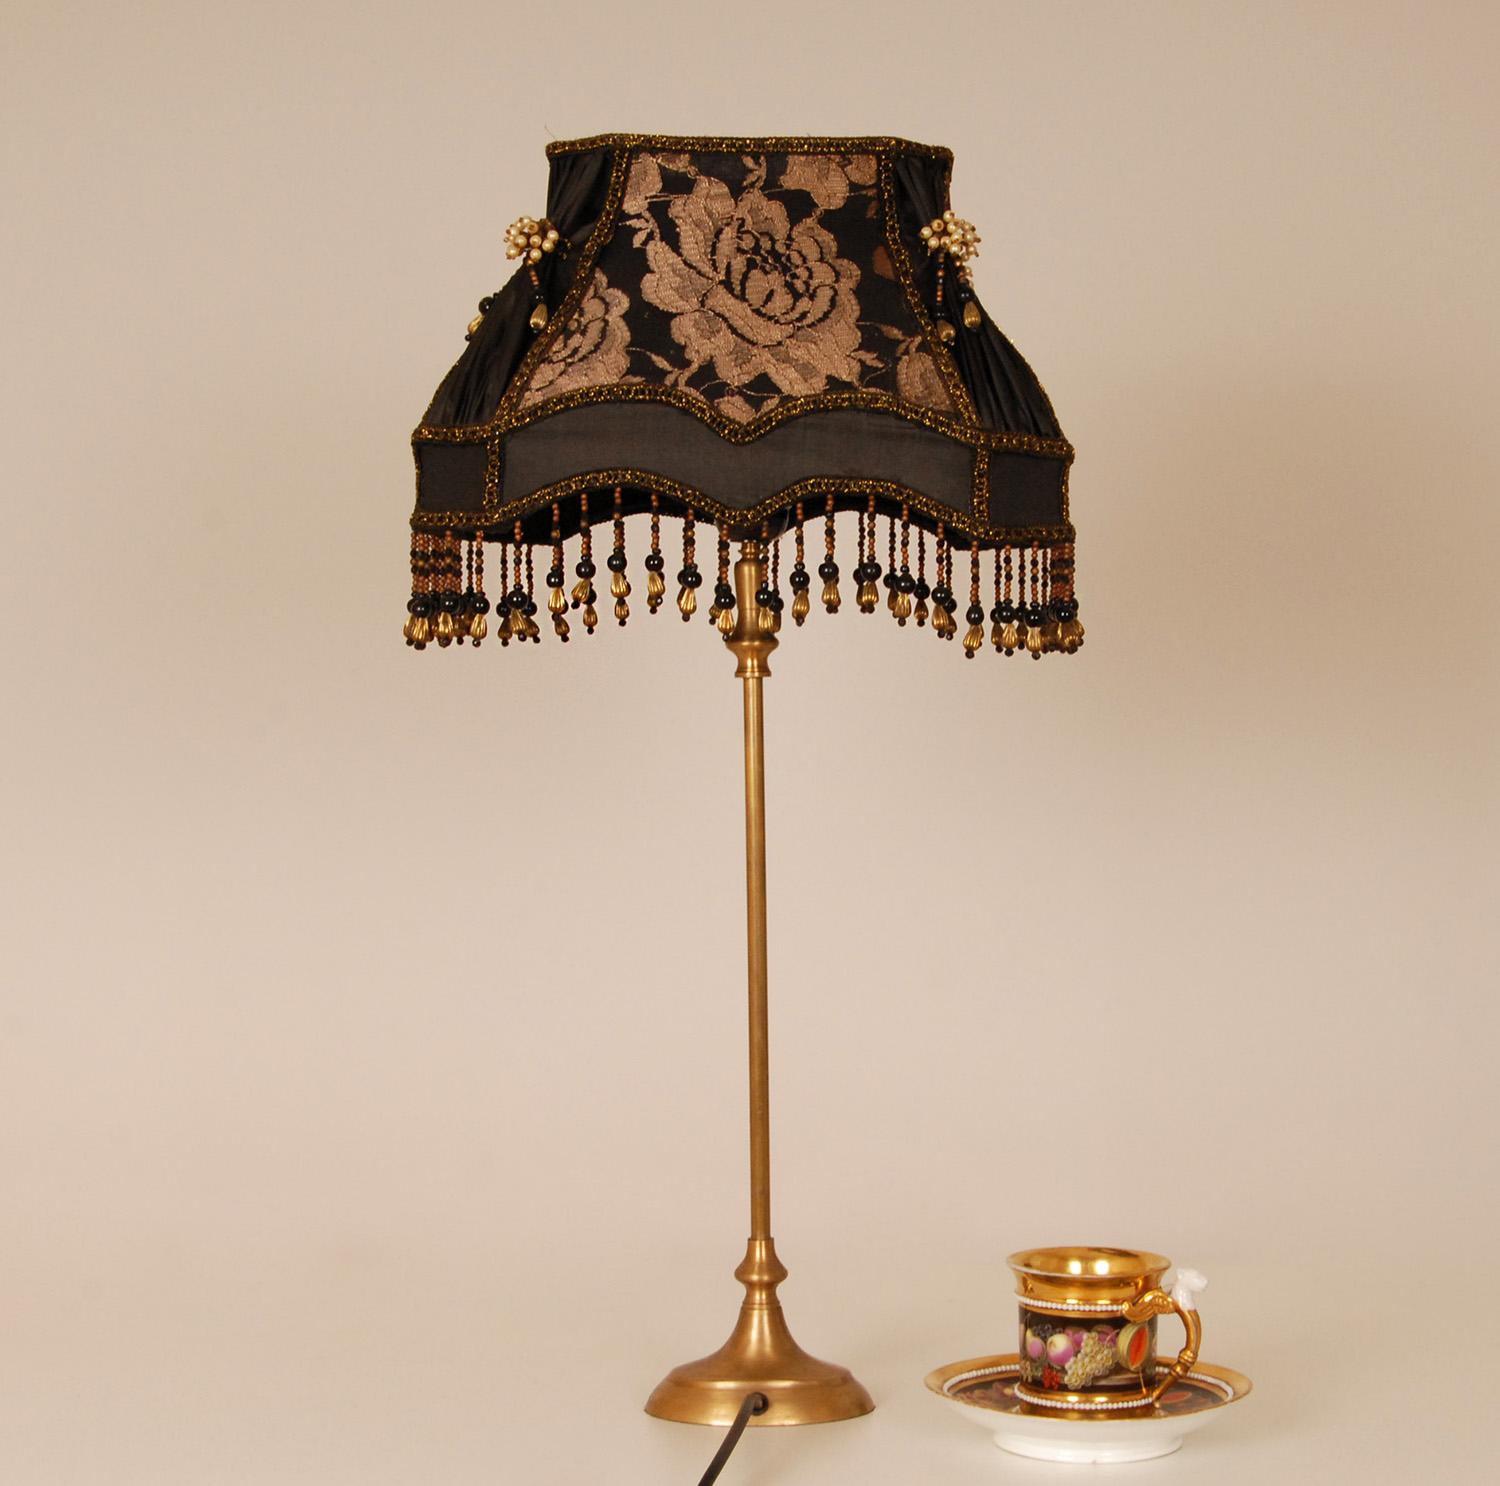 Vintage French Baroque Lamp Fringed Beaded 1970s Gold and Black For Sale 2